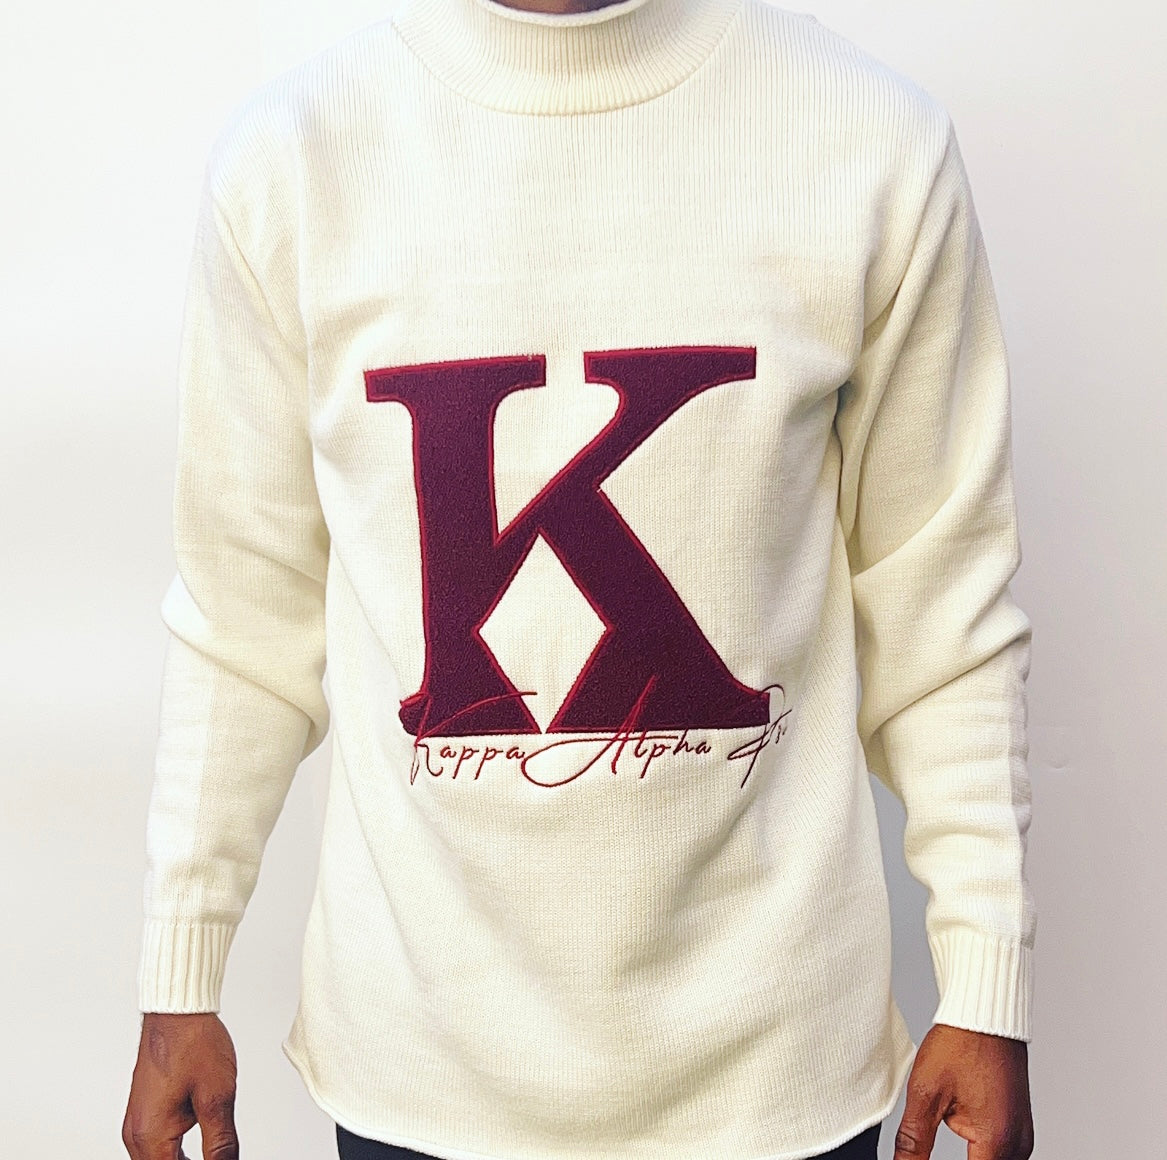 Exclusive Kappa Alpha Psi Chenille Appliqué Embroidery Crimson Sweater. This is the perfect long-sleeved Sweater to wear while showing off your Kappa Alpha Psi fraternity . A comfortable 100% Acrylic with a Chenille K diamond and Kappa Alpha Psi embroidery across the chest give you the perfect fit. This sweater is also a perfect gift for your favorite Kappa Man.